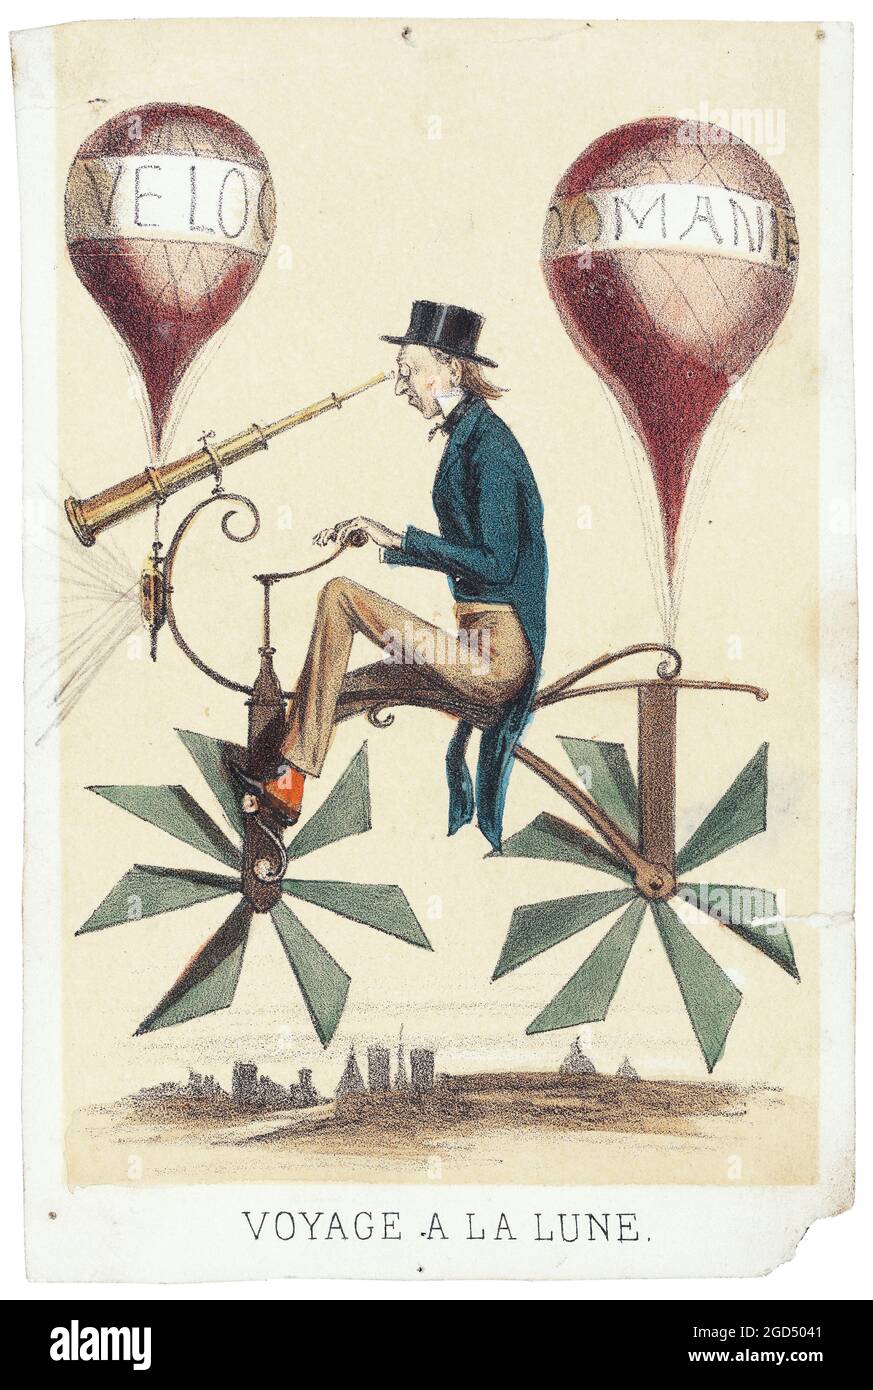 Voyage a la lune - French vintage poster. Bicycle balloon (Aircraft) - 1865. Veloc[ipedes], Cartoon / illustrated. Stock Photo